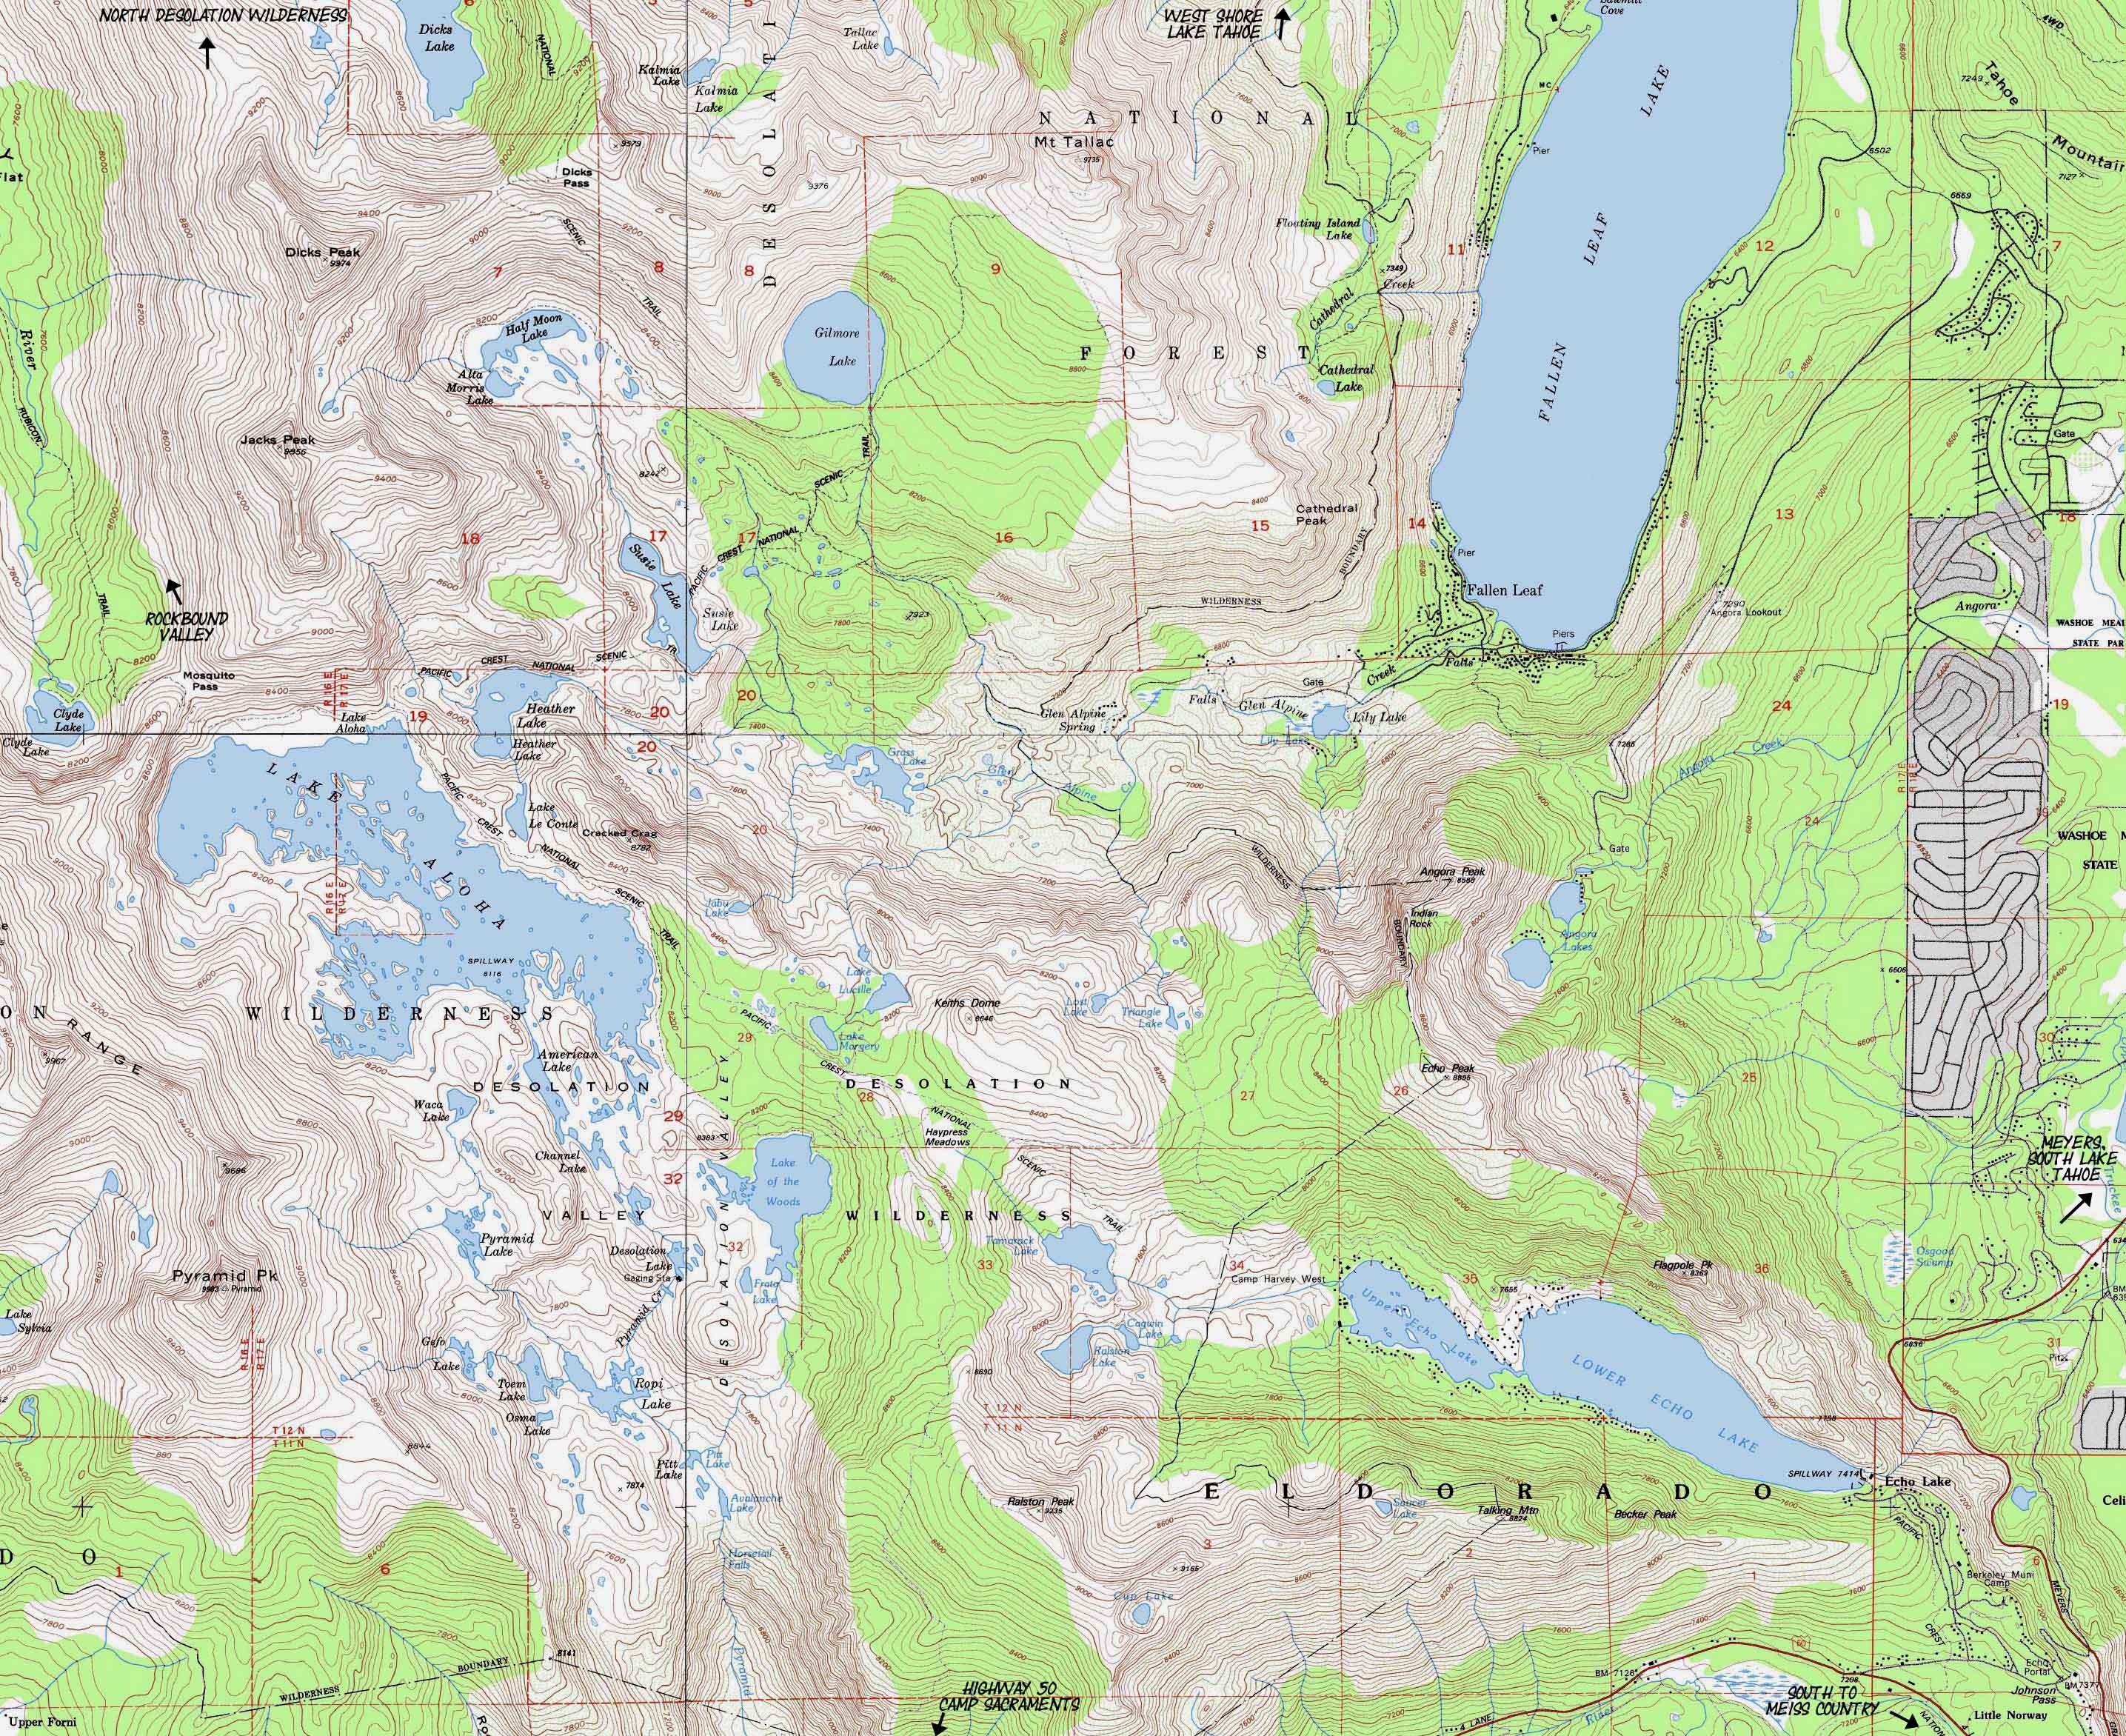 Map of Lake Aloha in the South-Center of Desolation Wilderness.